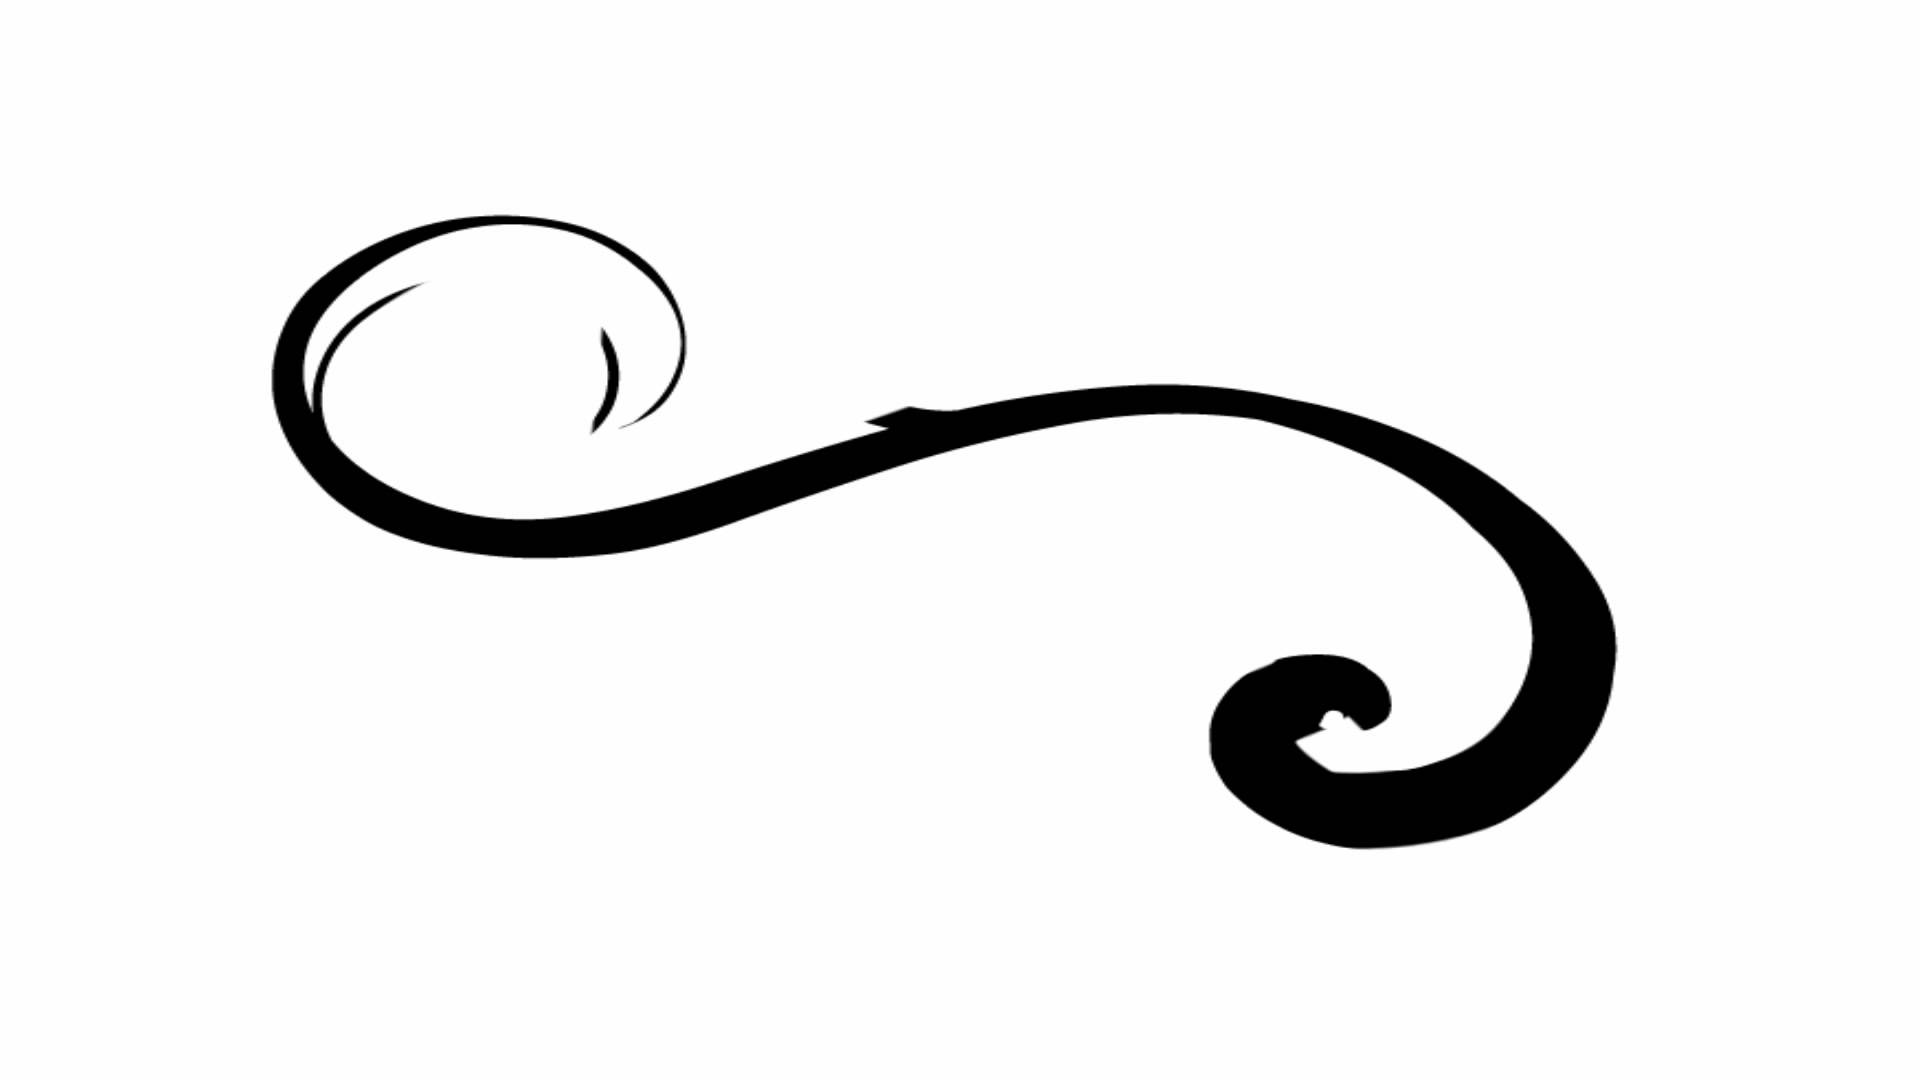 Clip Arts Related To : simple flourish png. view all Simple Flourish Clip.....